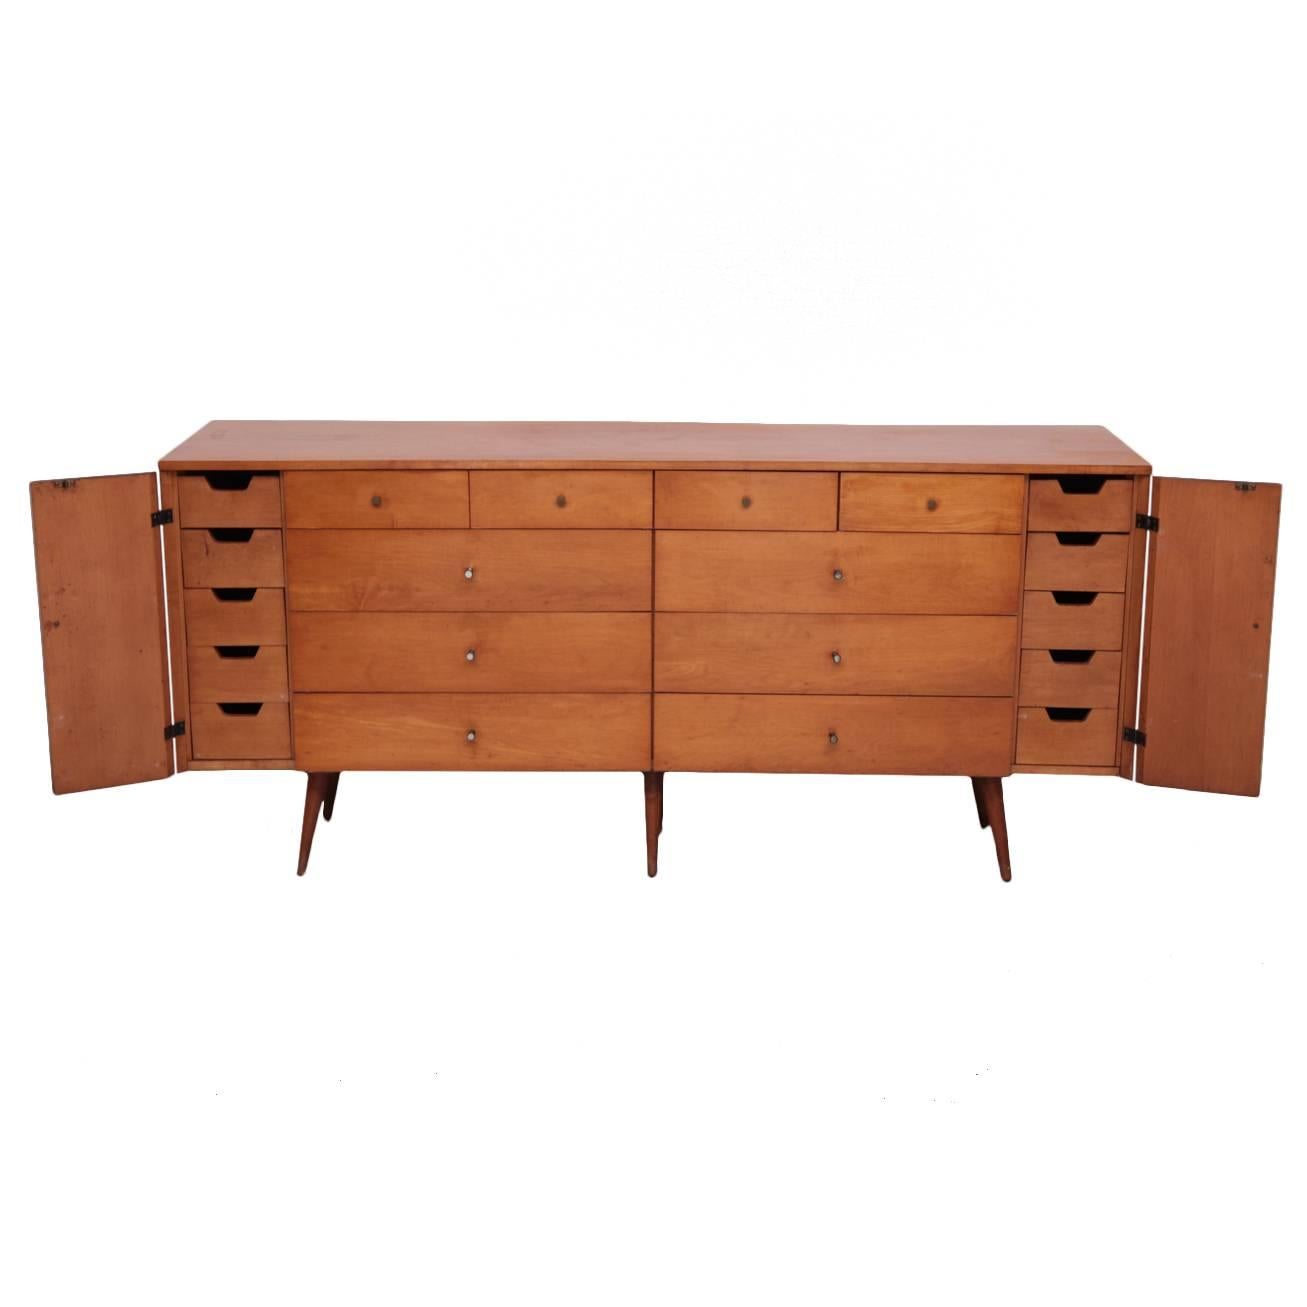 Paul McCobb Chest of Drawers Planner Group 20-Drawer Credenza by Winchendon